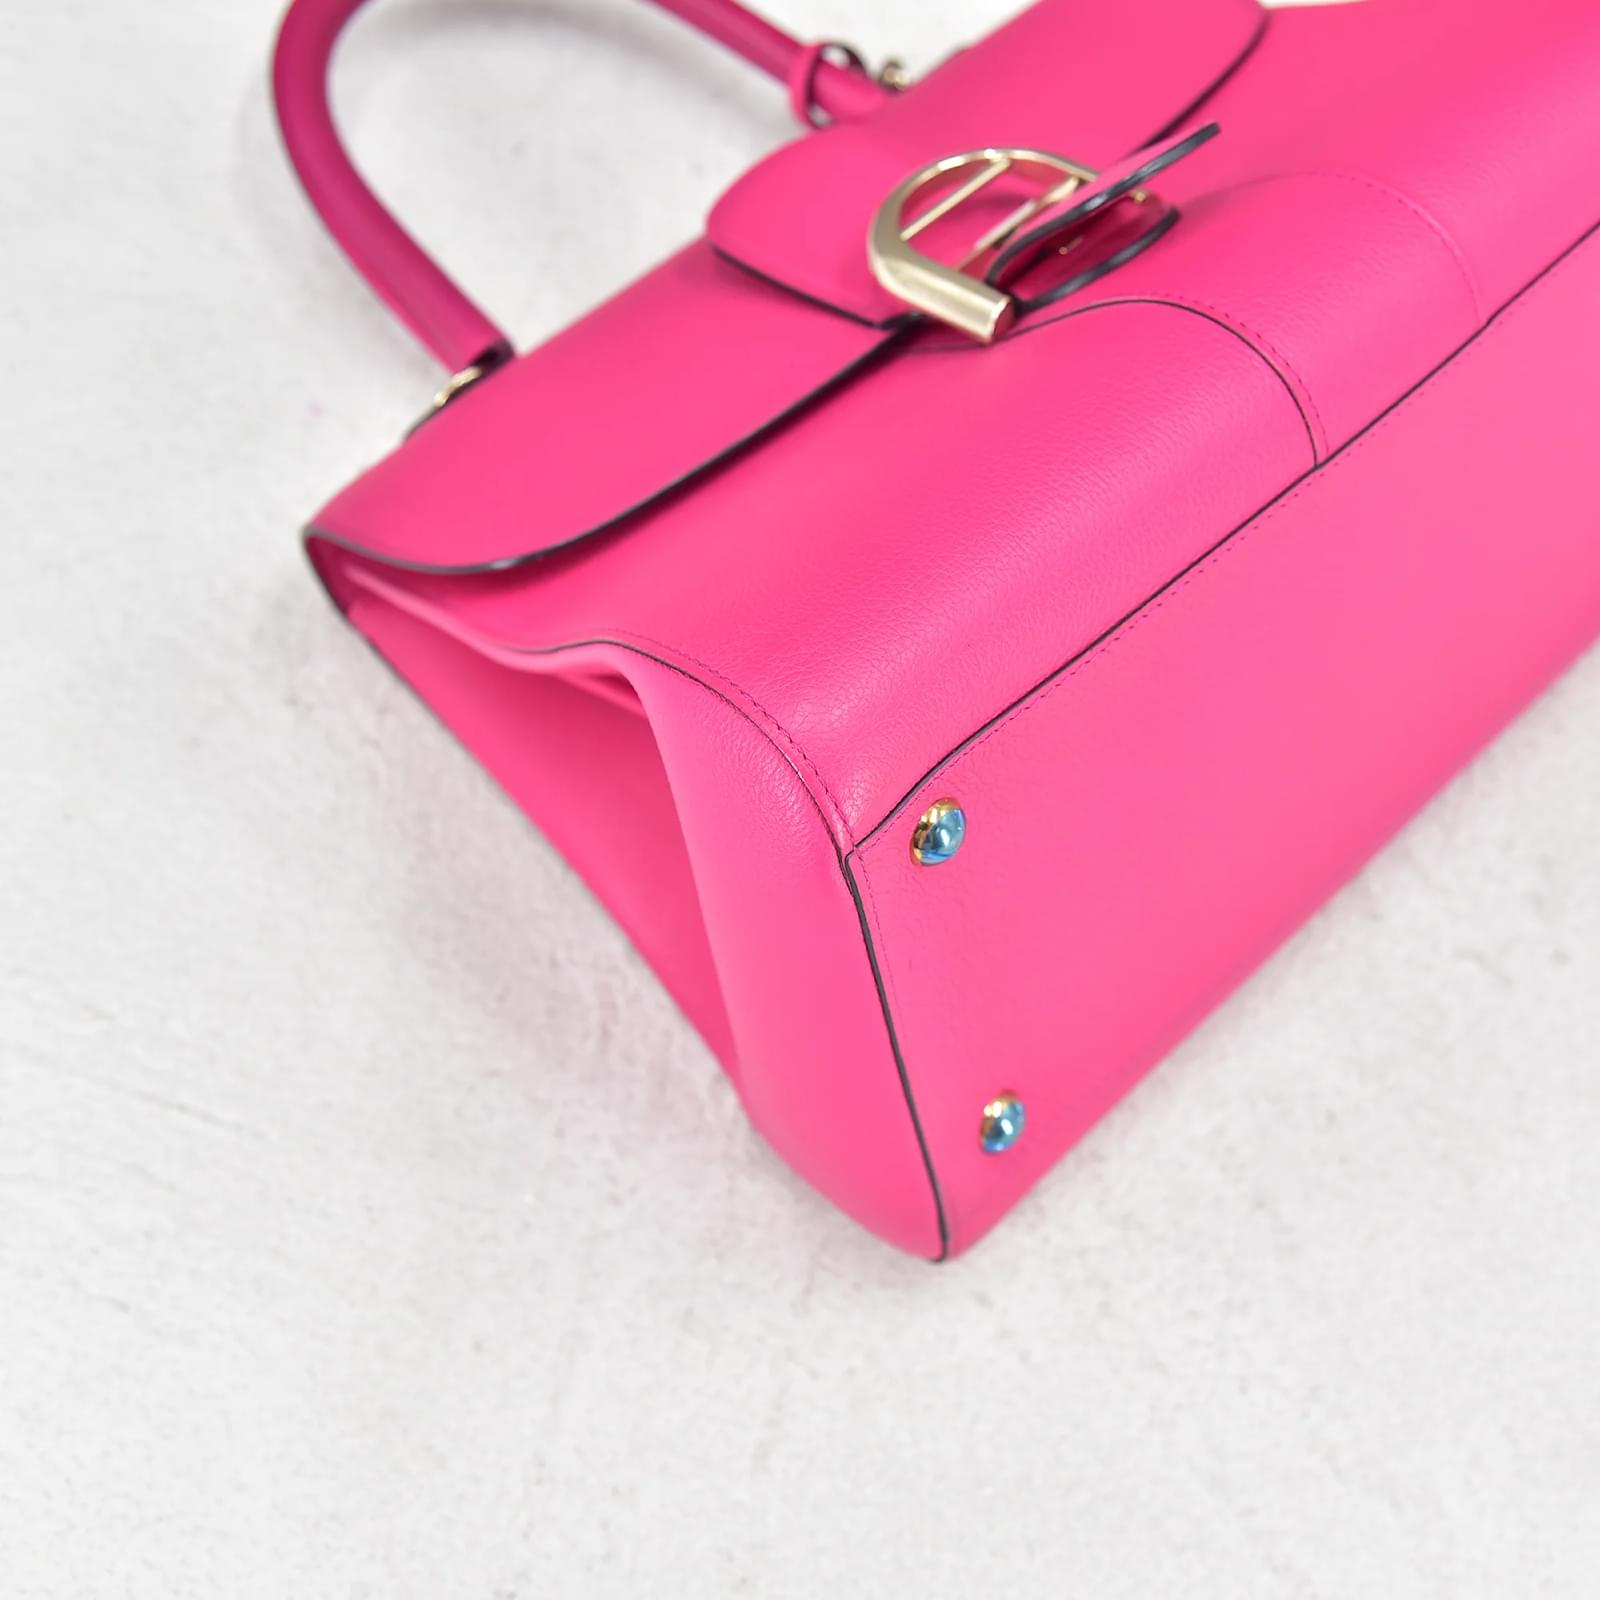 Delvaux Leather Brillant MM Bag Pink Pony-style calfskin ref